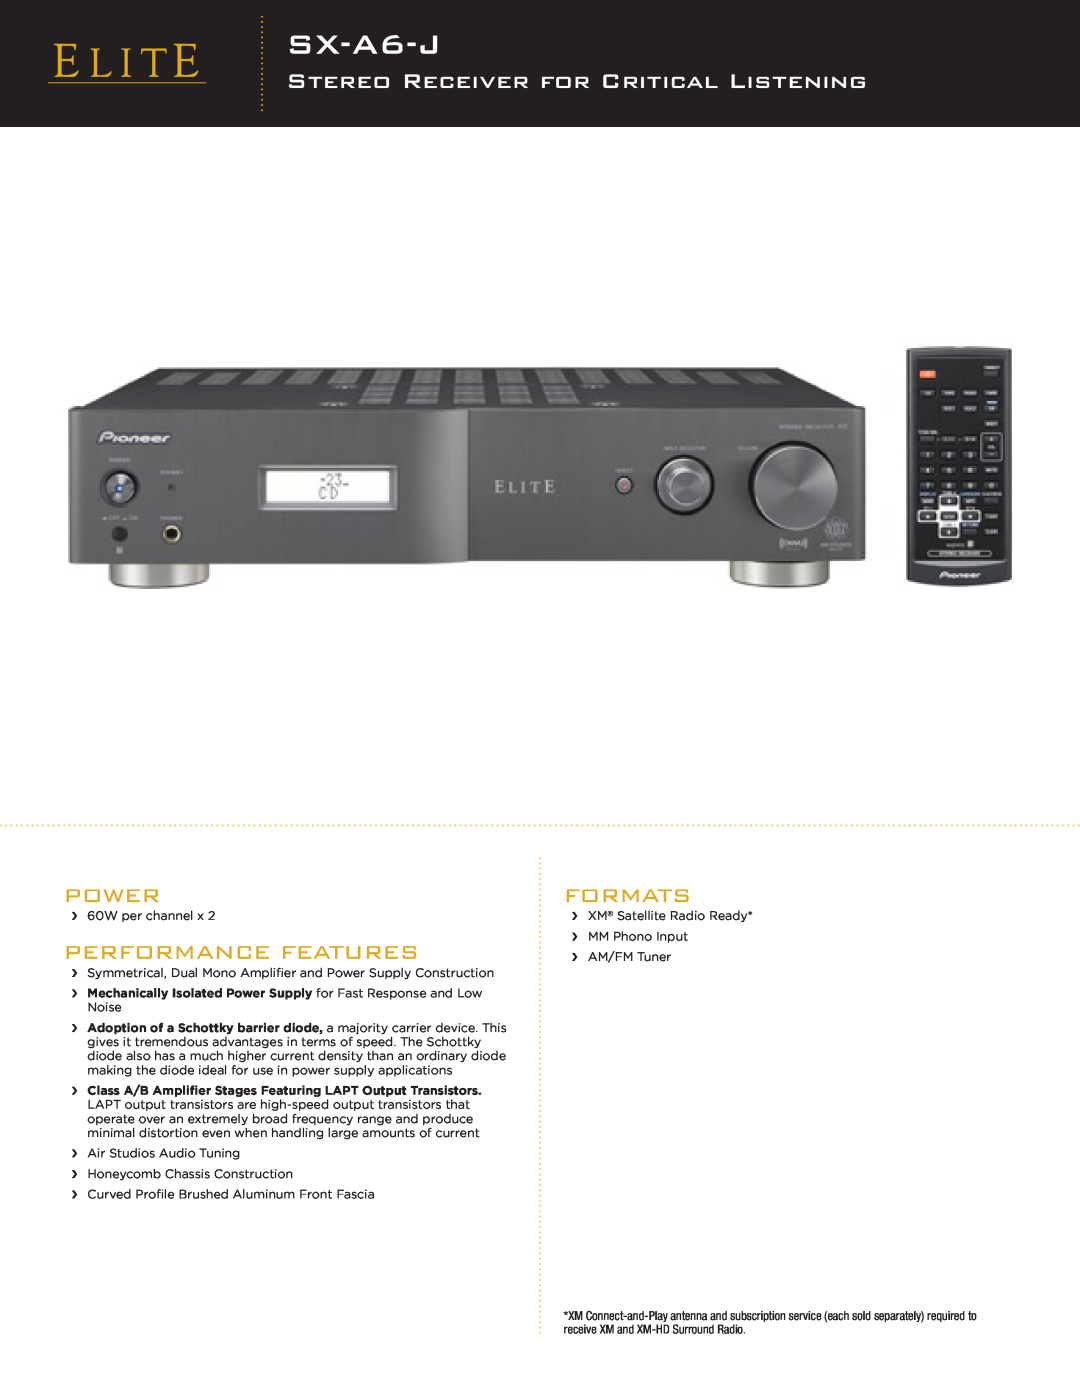 Elite SX-A6-J manual Stereo Receiver For Critical Listening, Power, Performance Features, Formats 